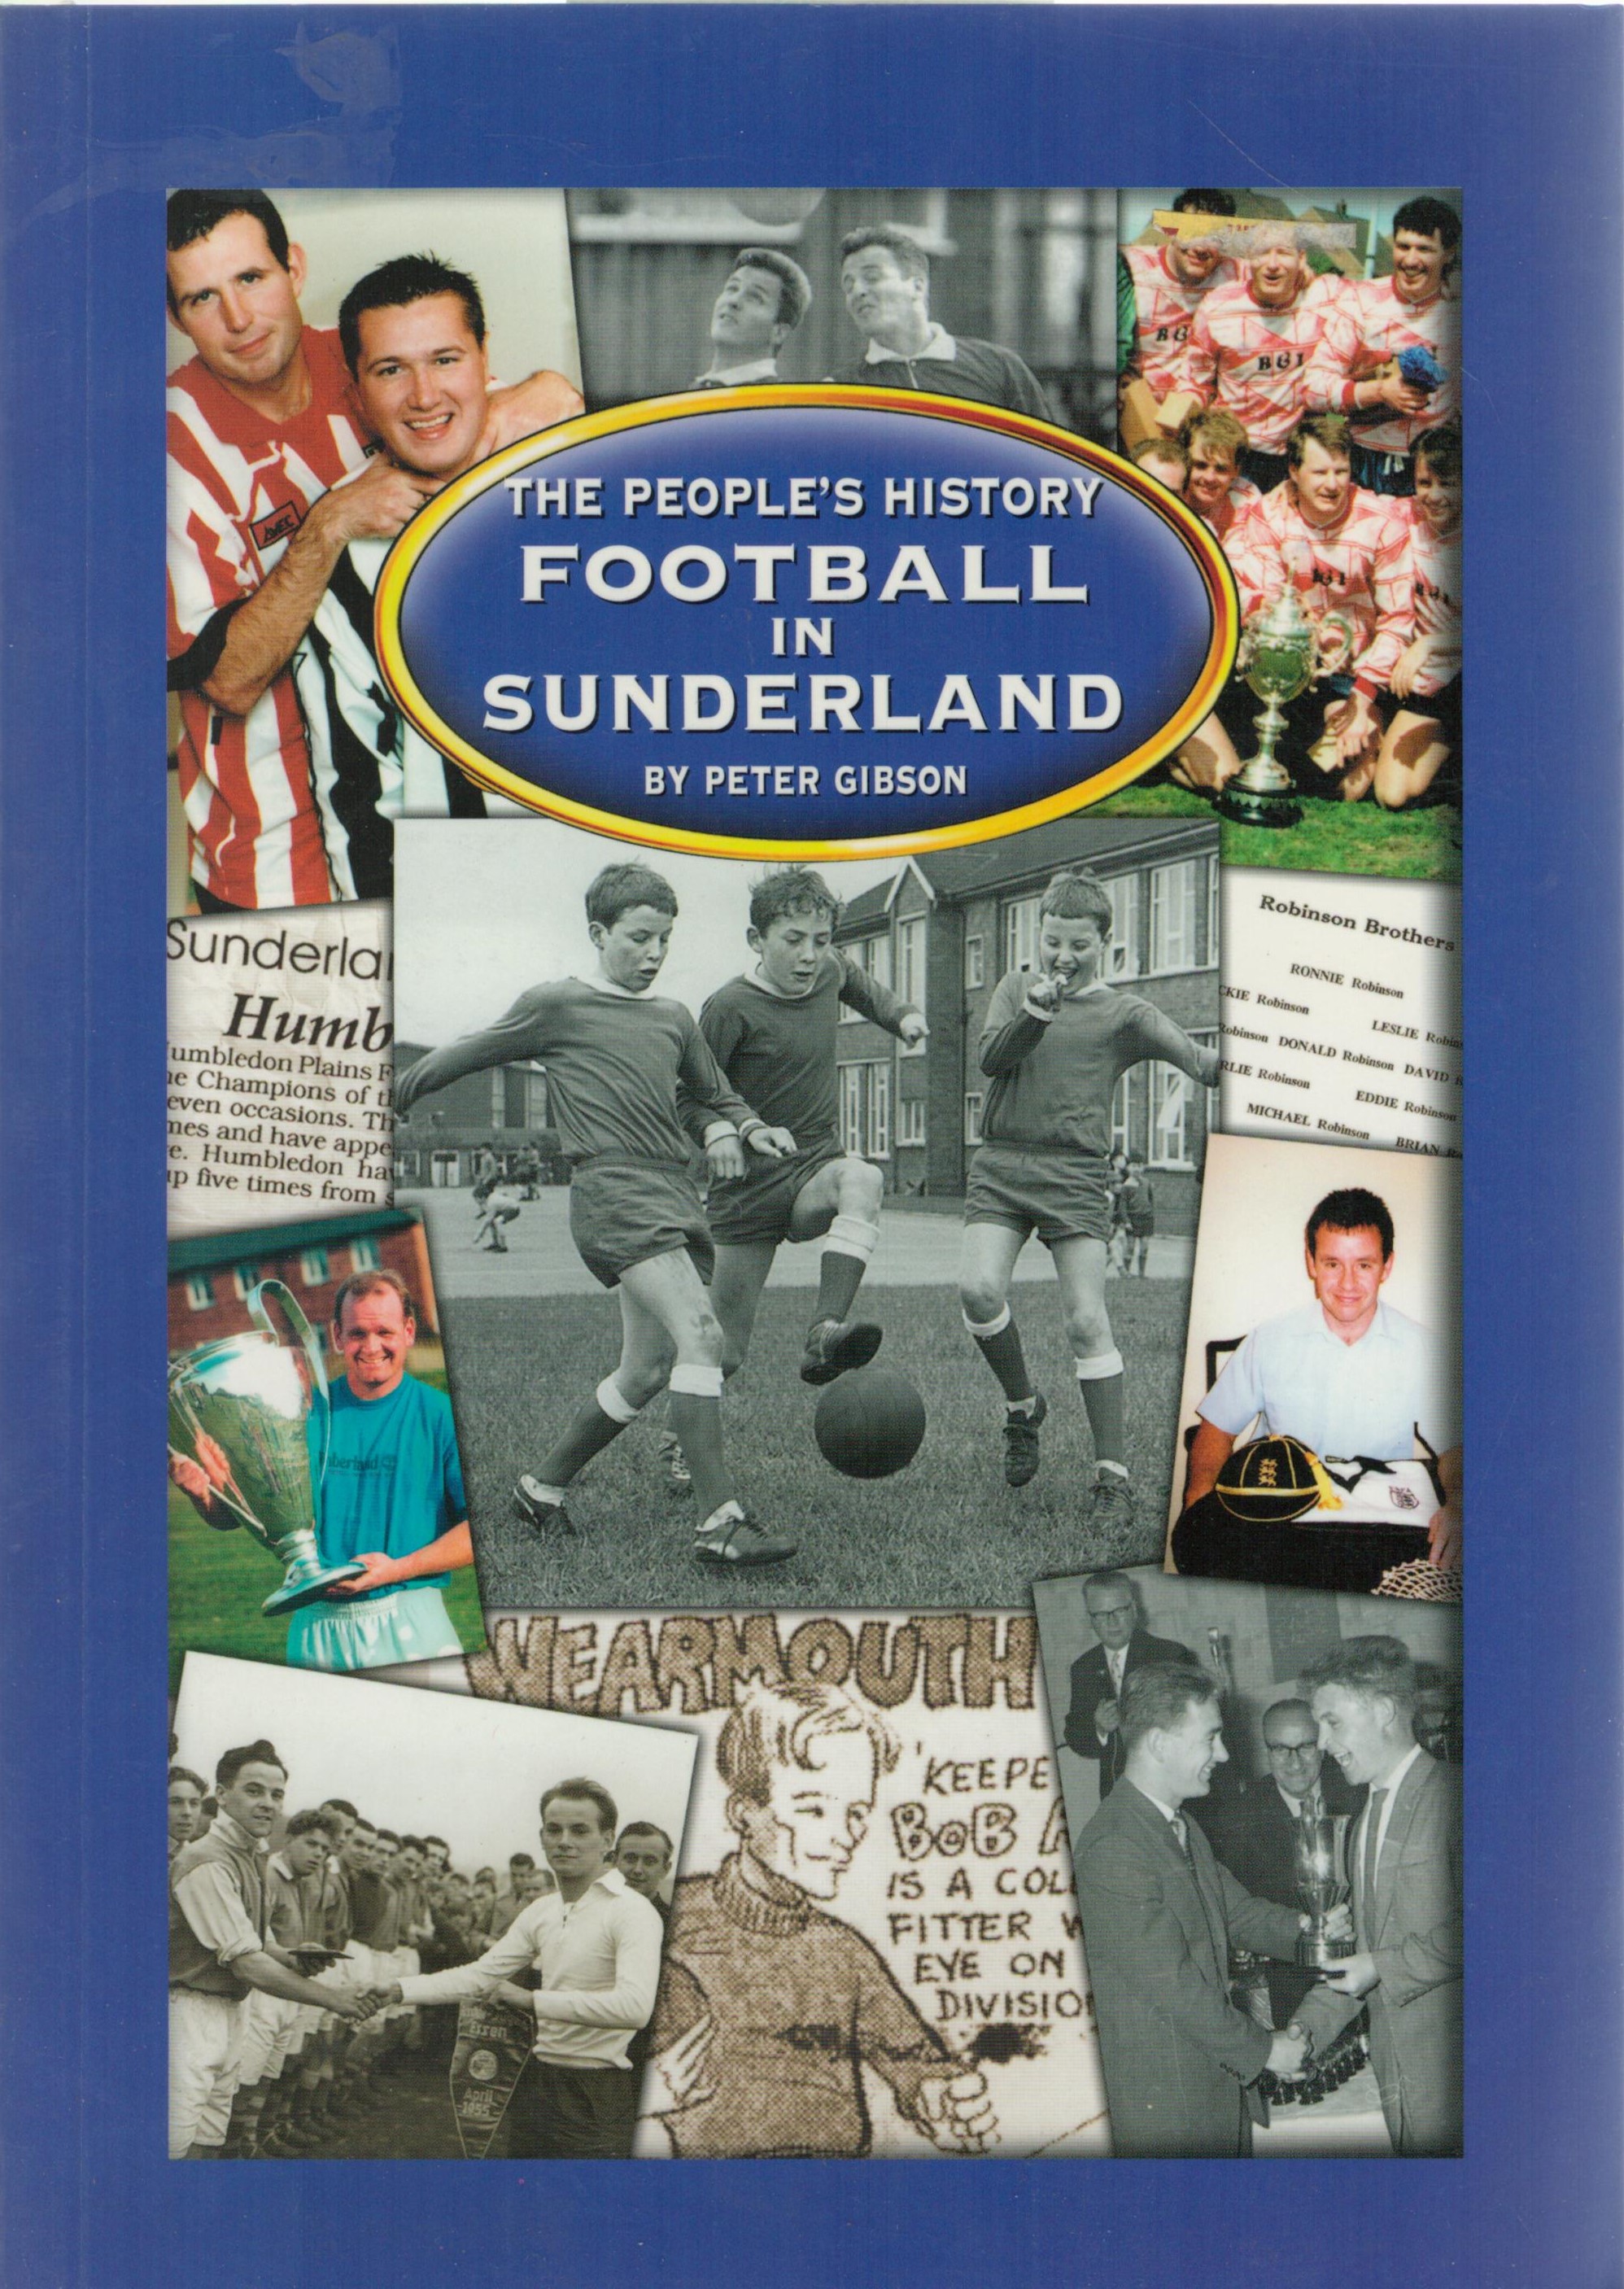 The People's History Football in Sunderland by Peter Gibson. 1st Edition Paperback Book Published in